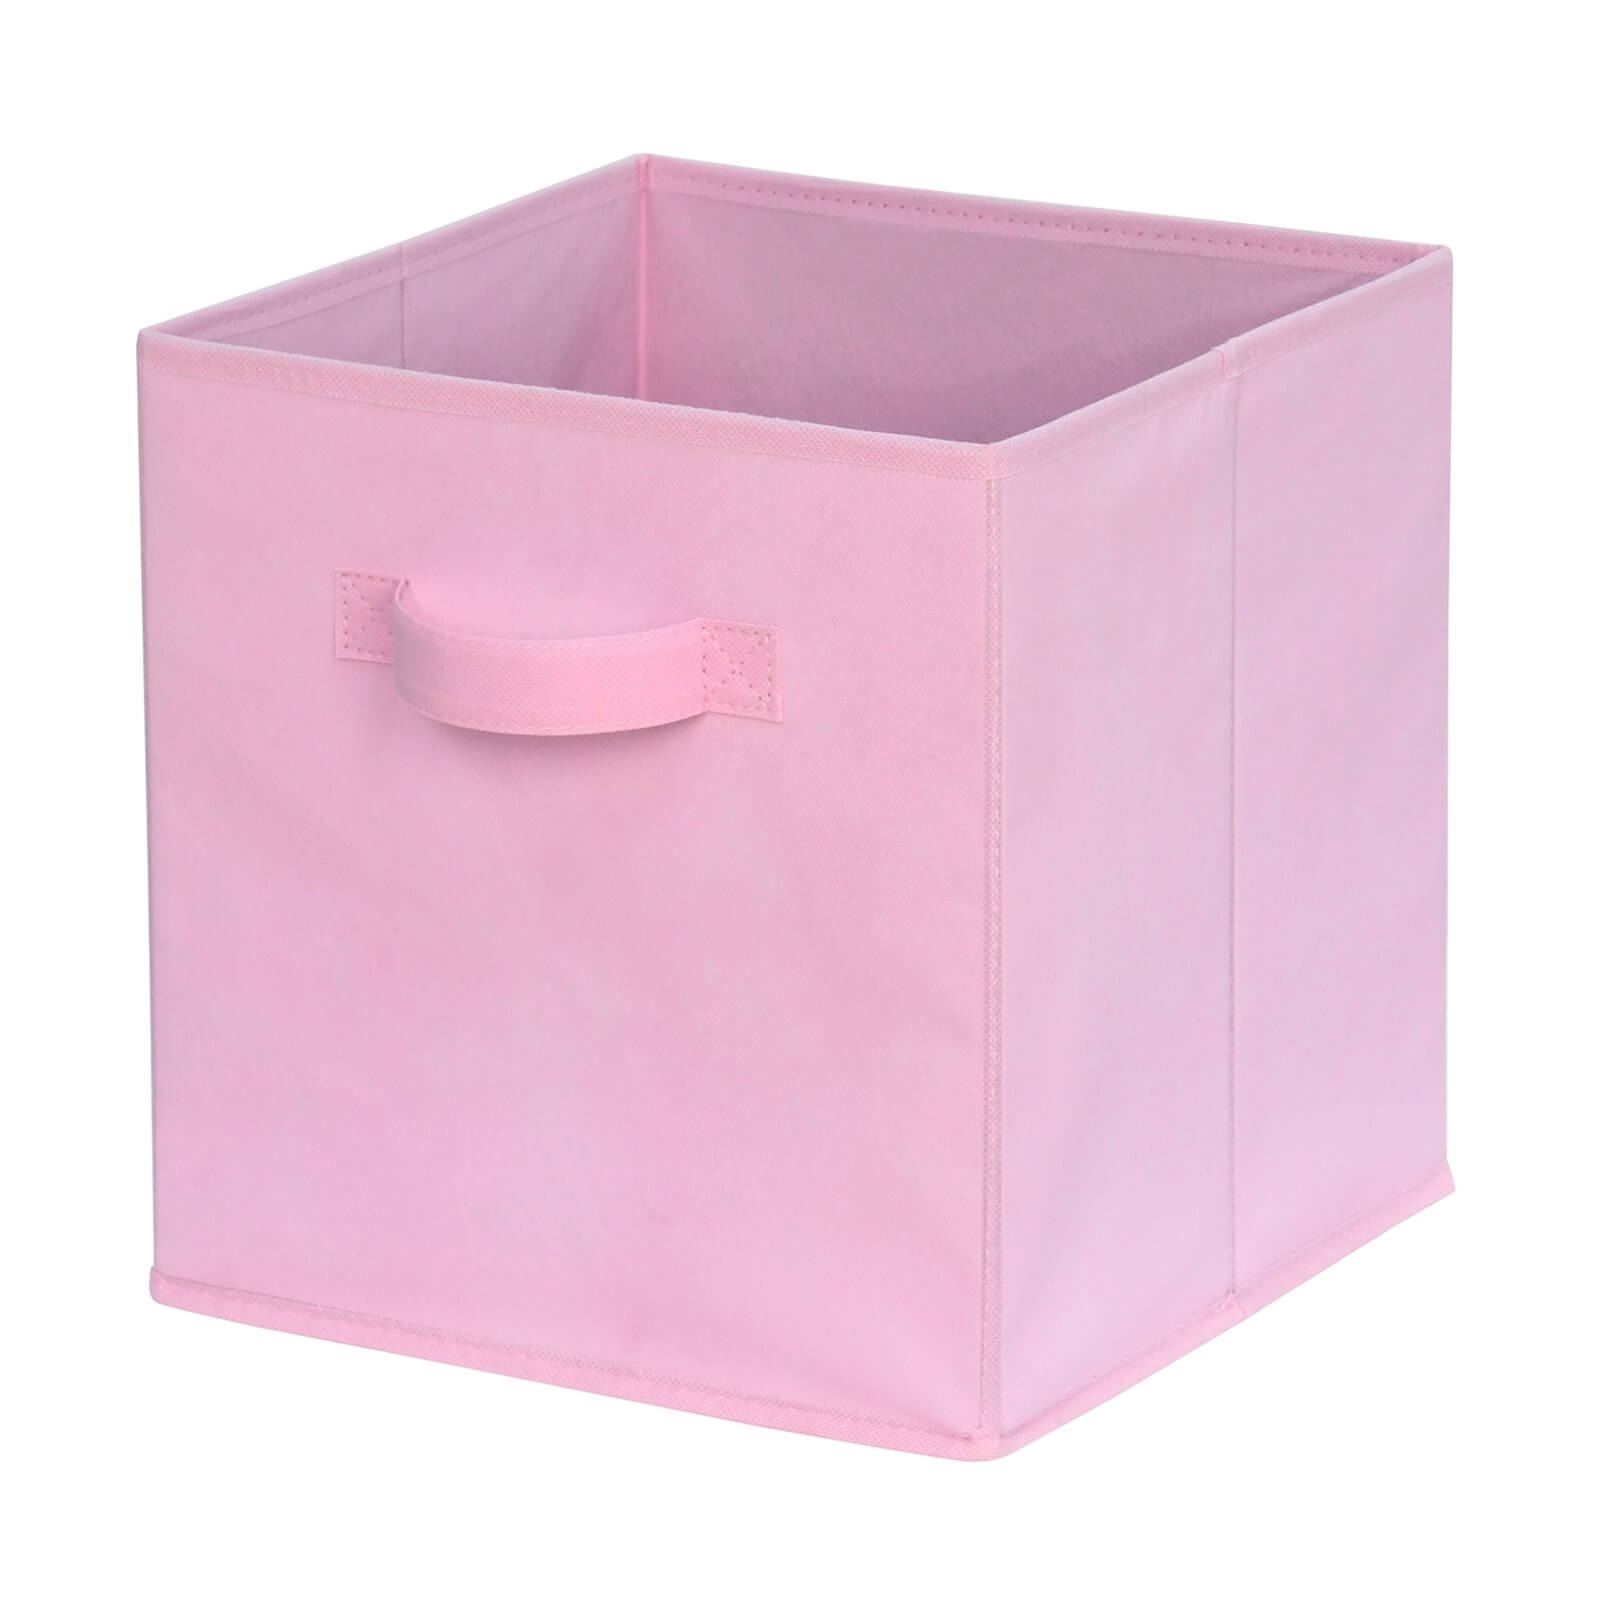 Photo of Compact Cube Fabric Insert - Pale Pink